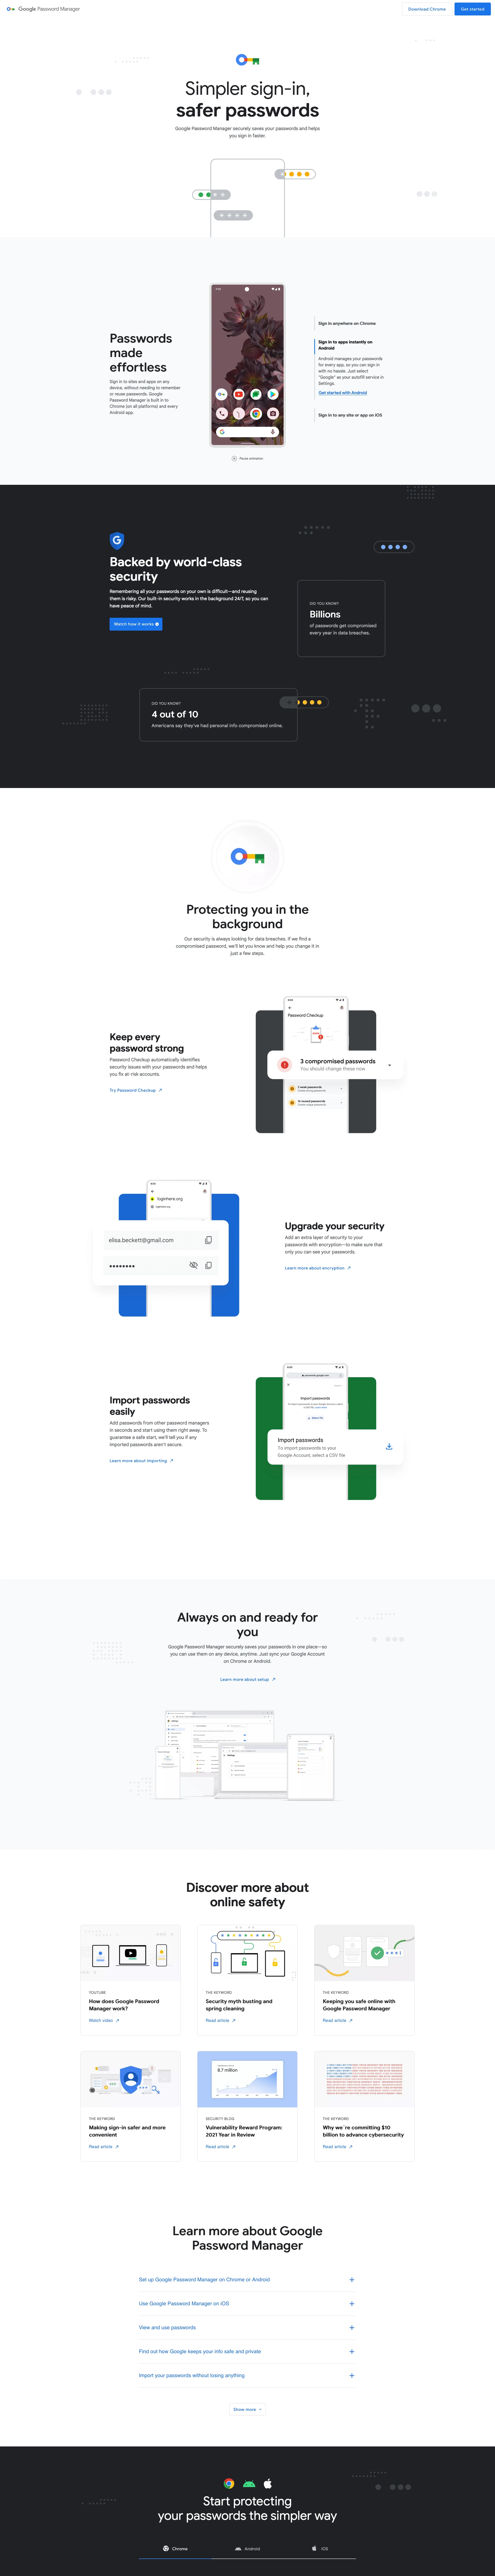 Google Password Manager Landing Page Example: Manage, store, and create secure passwords with Google Password Manager and easily sign in to sites in your Chrome browser and Android and iOS apps.